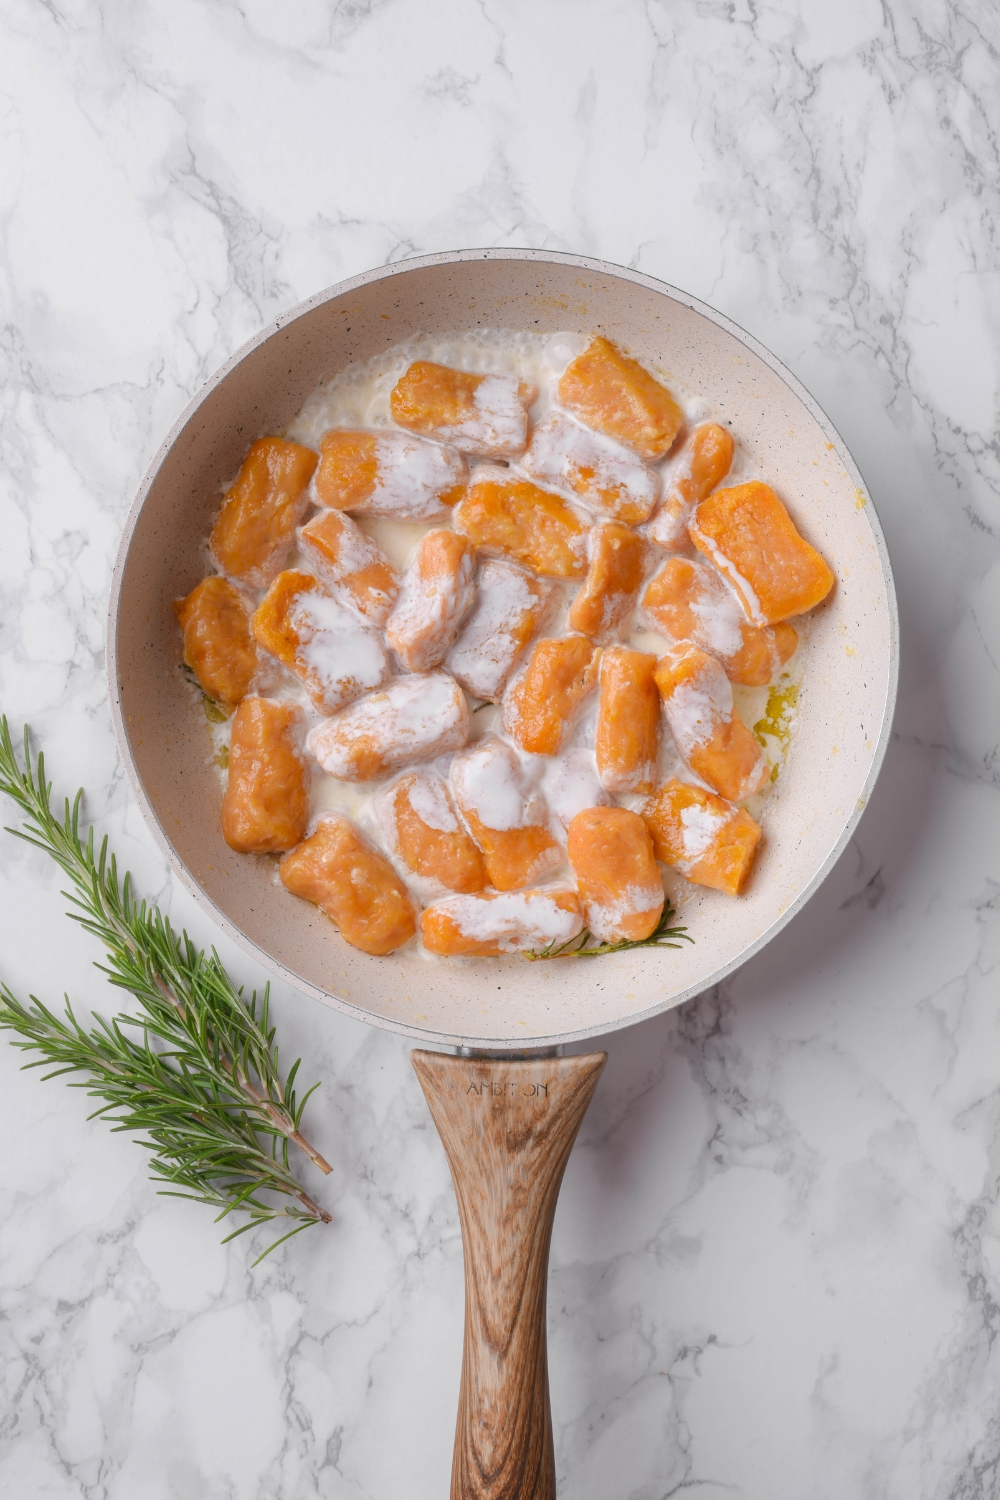 A skillet filled with sweet potato gnocchi and cream sauce.